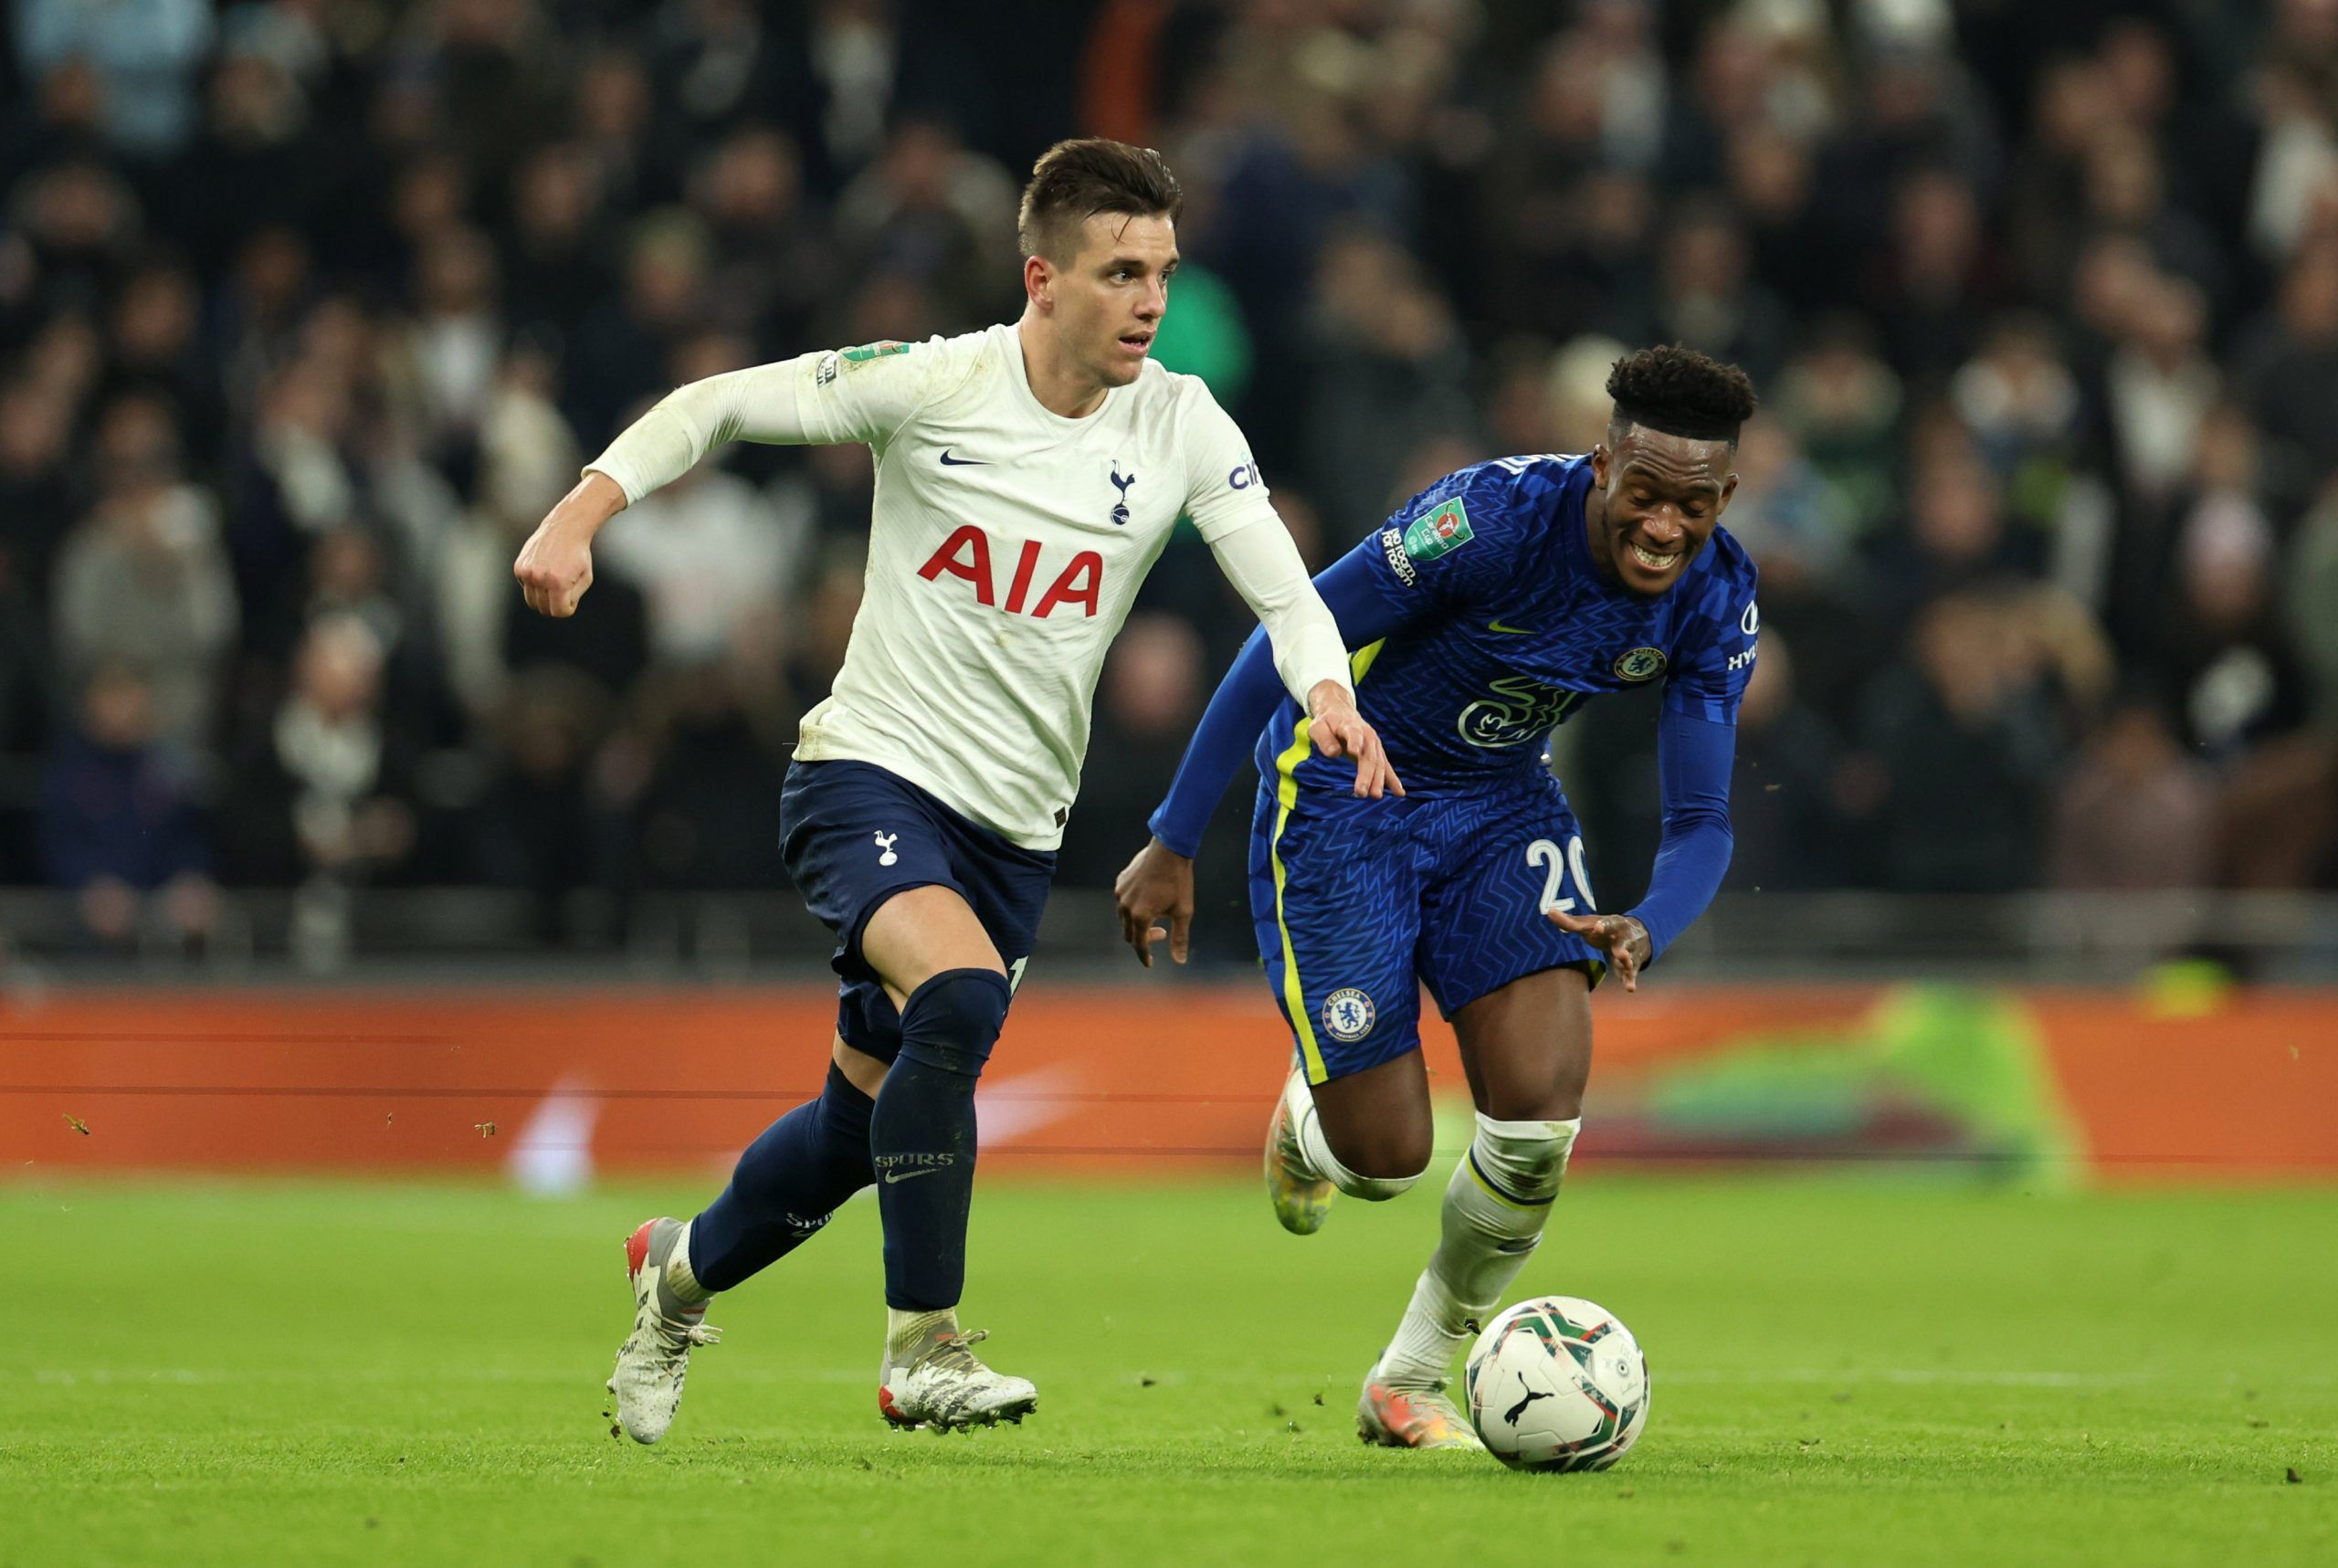 Soccer Football - Carabao Cup - Semi Final - Second Leg - Tottenham Hotspur v Chelsea - Tottenham Hotspur Stadium, London, Britain - January 12, 2022  Tottenham Hotspur's Giovani Lo Celso in action with Chelsea's Callum Hudson-Odoi REUTERS/Hannah Mckay EDITORIAL USE ONLY. No use with unauthorized audio, video, data, fixture lists, club/league logos or 'live' services. Online in-match use limited to 75 images, no video emulation. No use in betting, games or single club /league/player publications